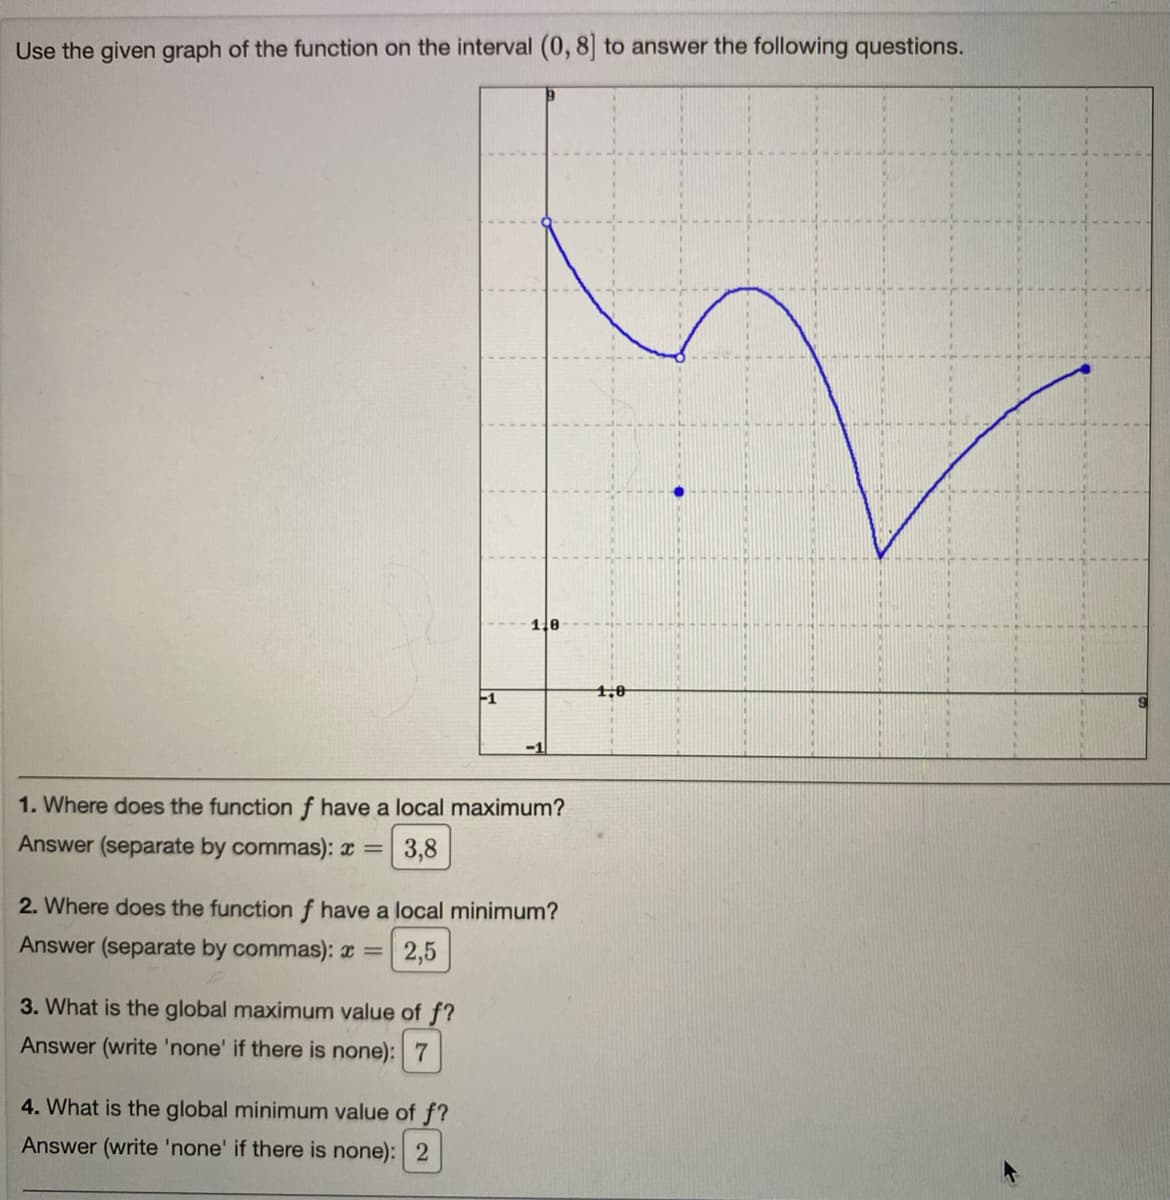 Use the given graph of the function on the interval (0, 8 to answer the following questions.
1.0
F1
1,0
1. Where does the functionf have a local maximum?
Answer (separate by commas): x =
3,8
2. Where does the functionf have a local minimum?
Answer (separate by commas): x =
2,5
3. What is the global maximum value of f?
Answer (write 'none' if there is none): 7
4. What is the global minimum value of f?
Answer (write 'none' if there is none): 2
